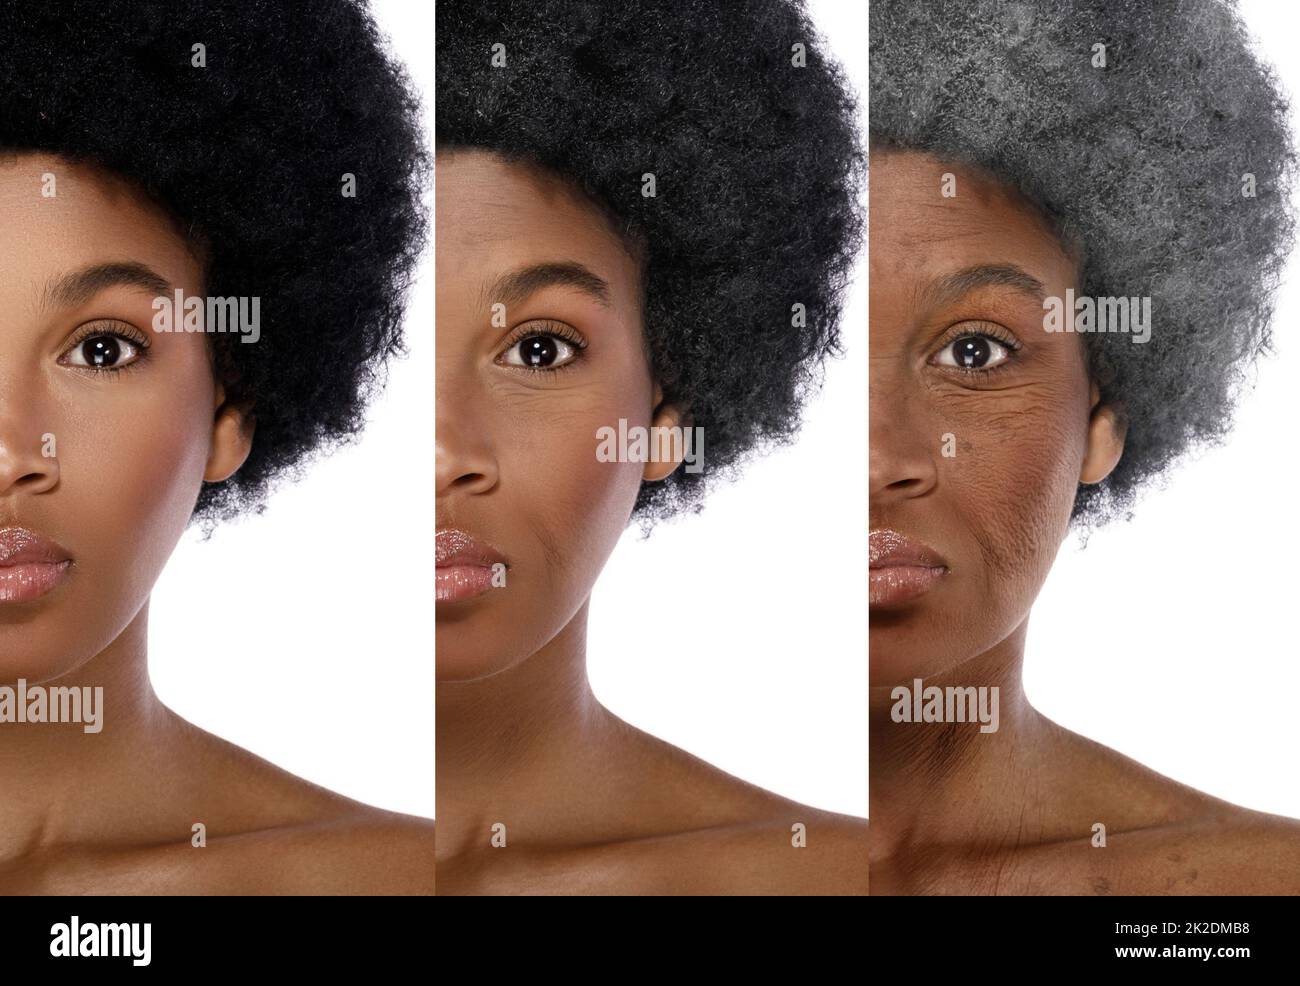 Comparison of young and elderly. African woman on white background. Stock Photo